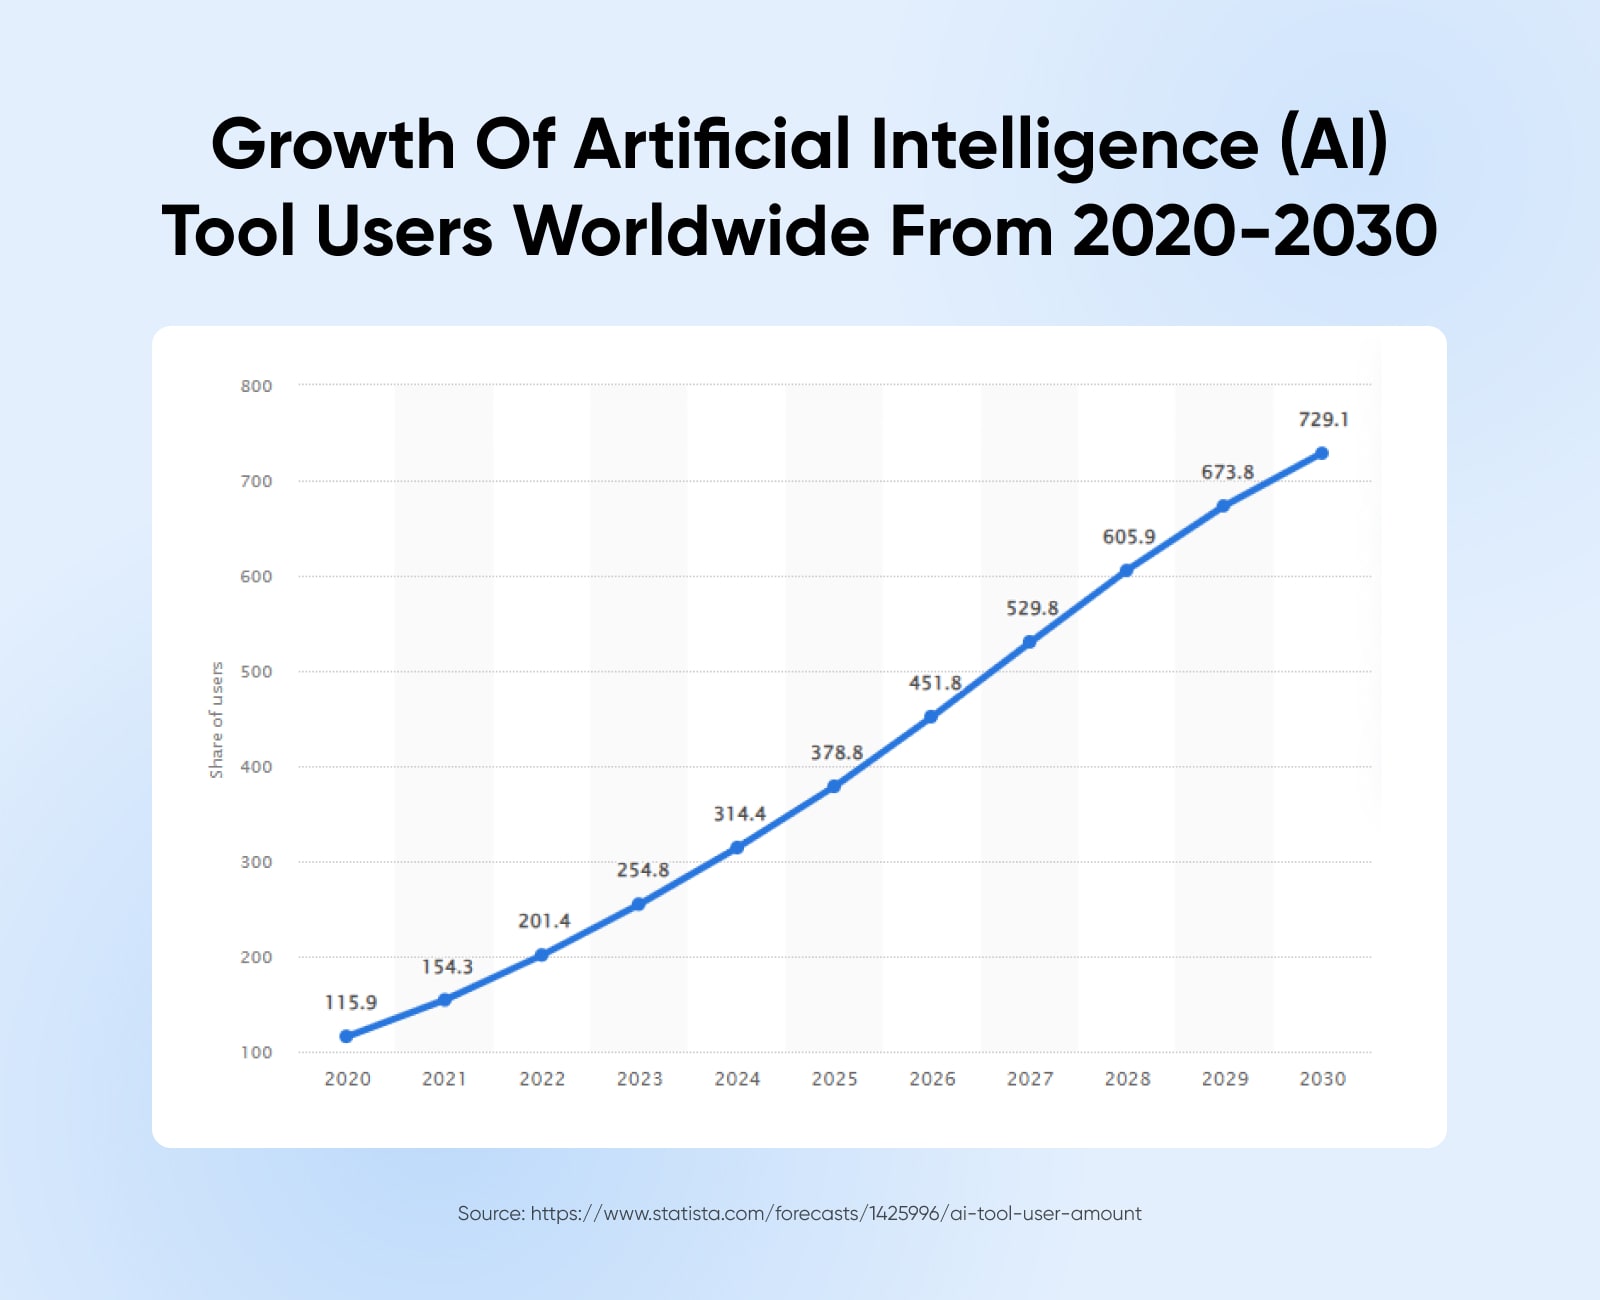 line chart showing the growth of AI tool users from 2020 to 2030 starting at 115.9 million and rising steadily to 729.1 million by 2030